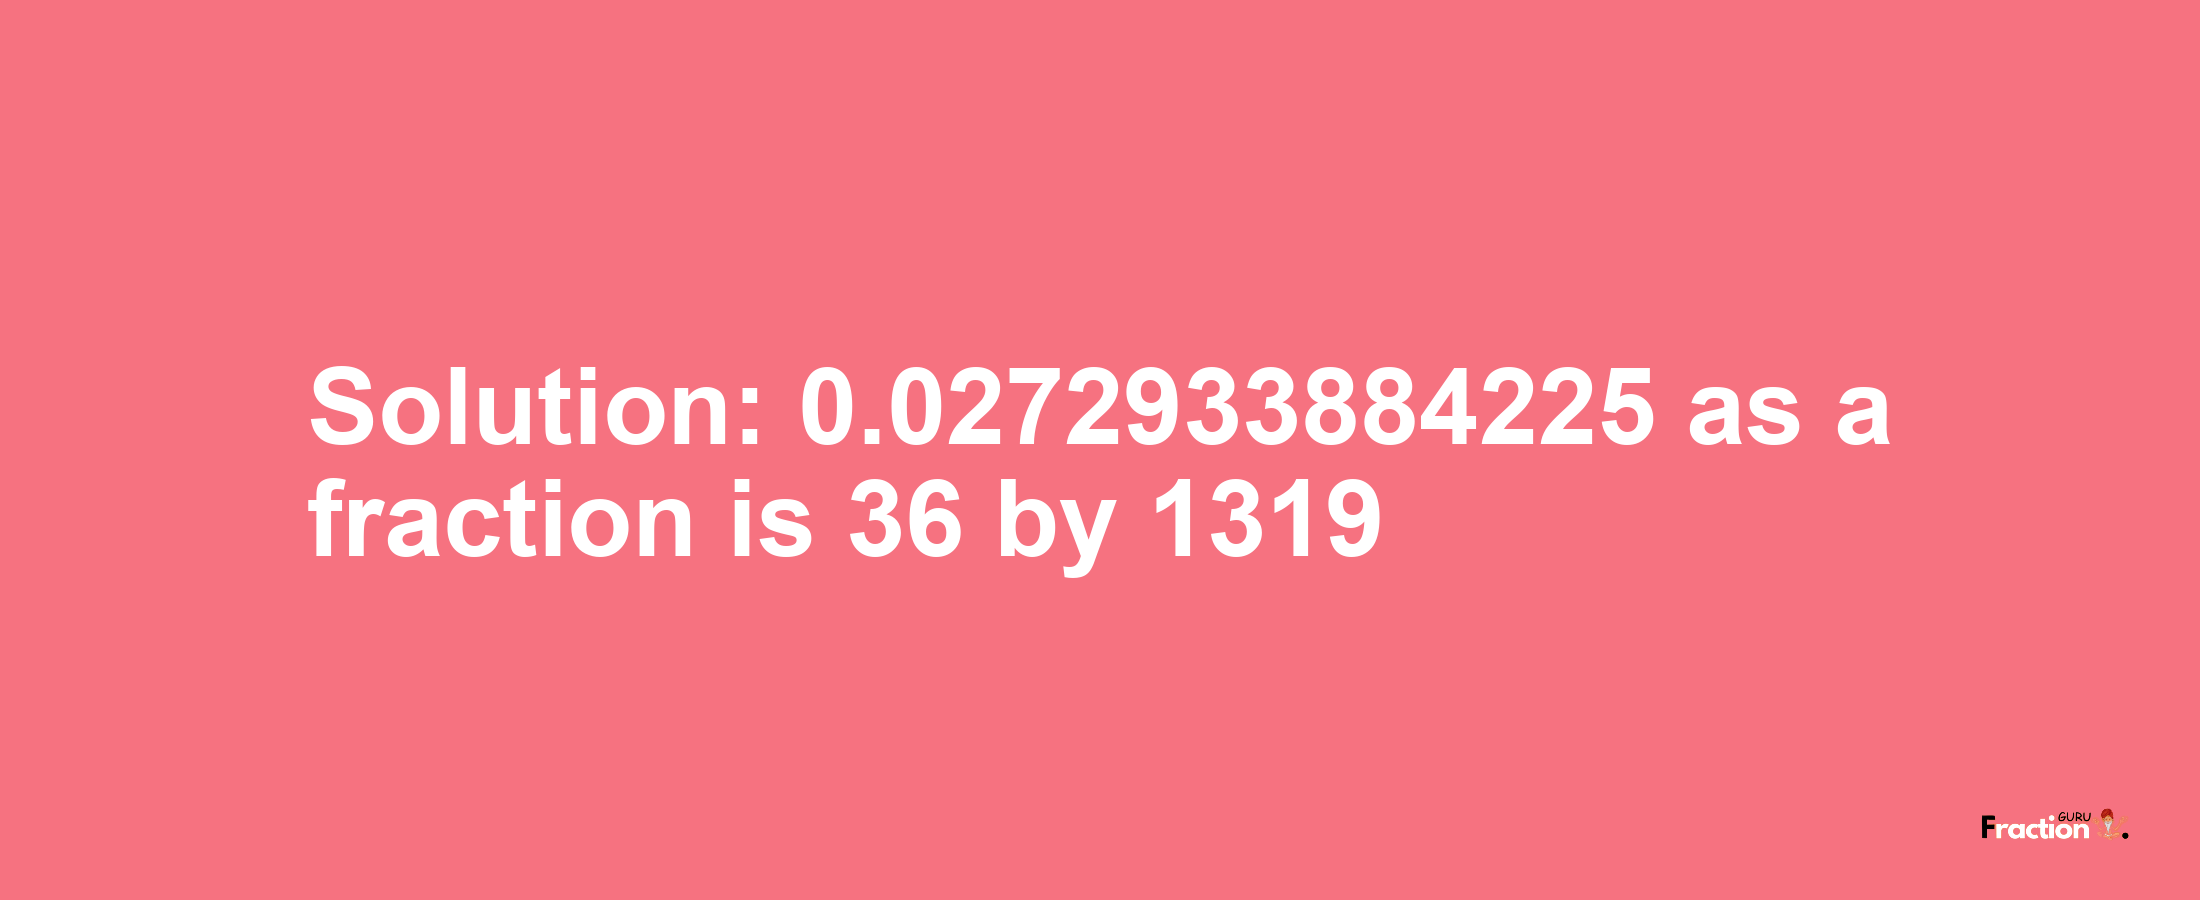 Solution:0.0272933884225 as a fraction is 36/1319